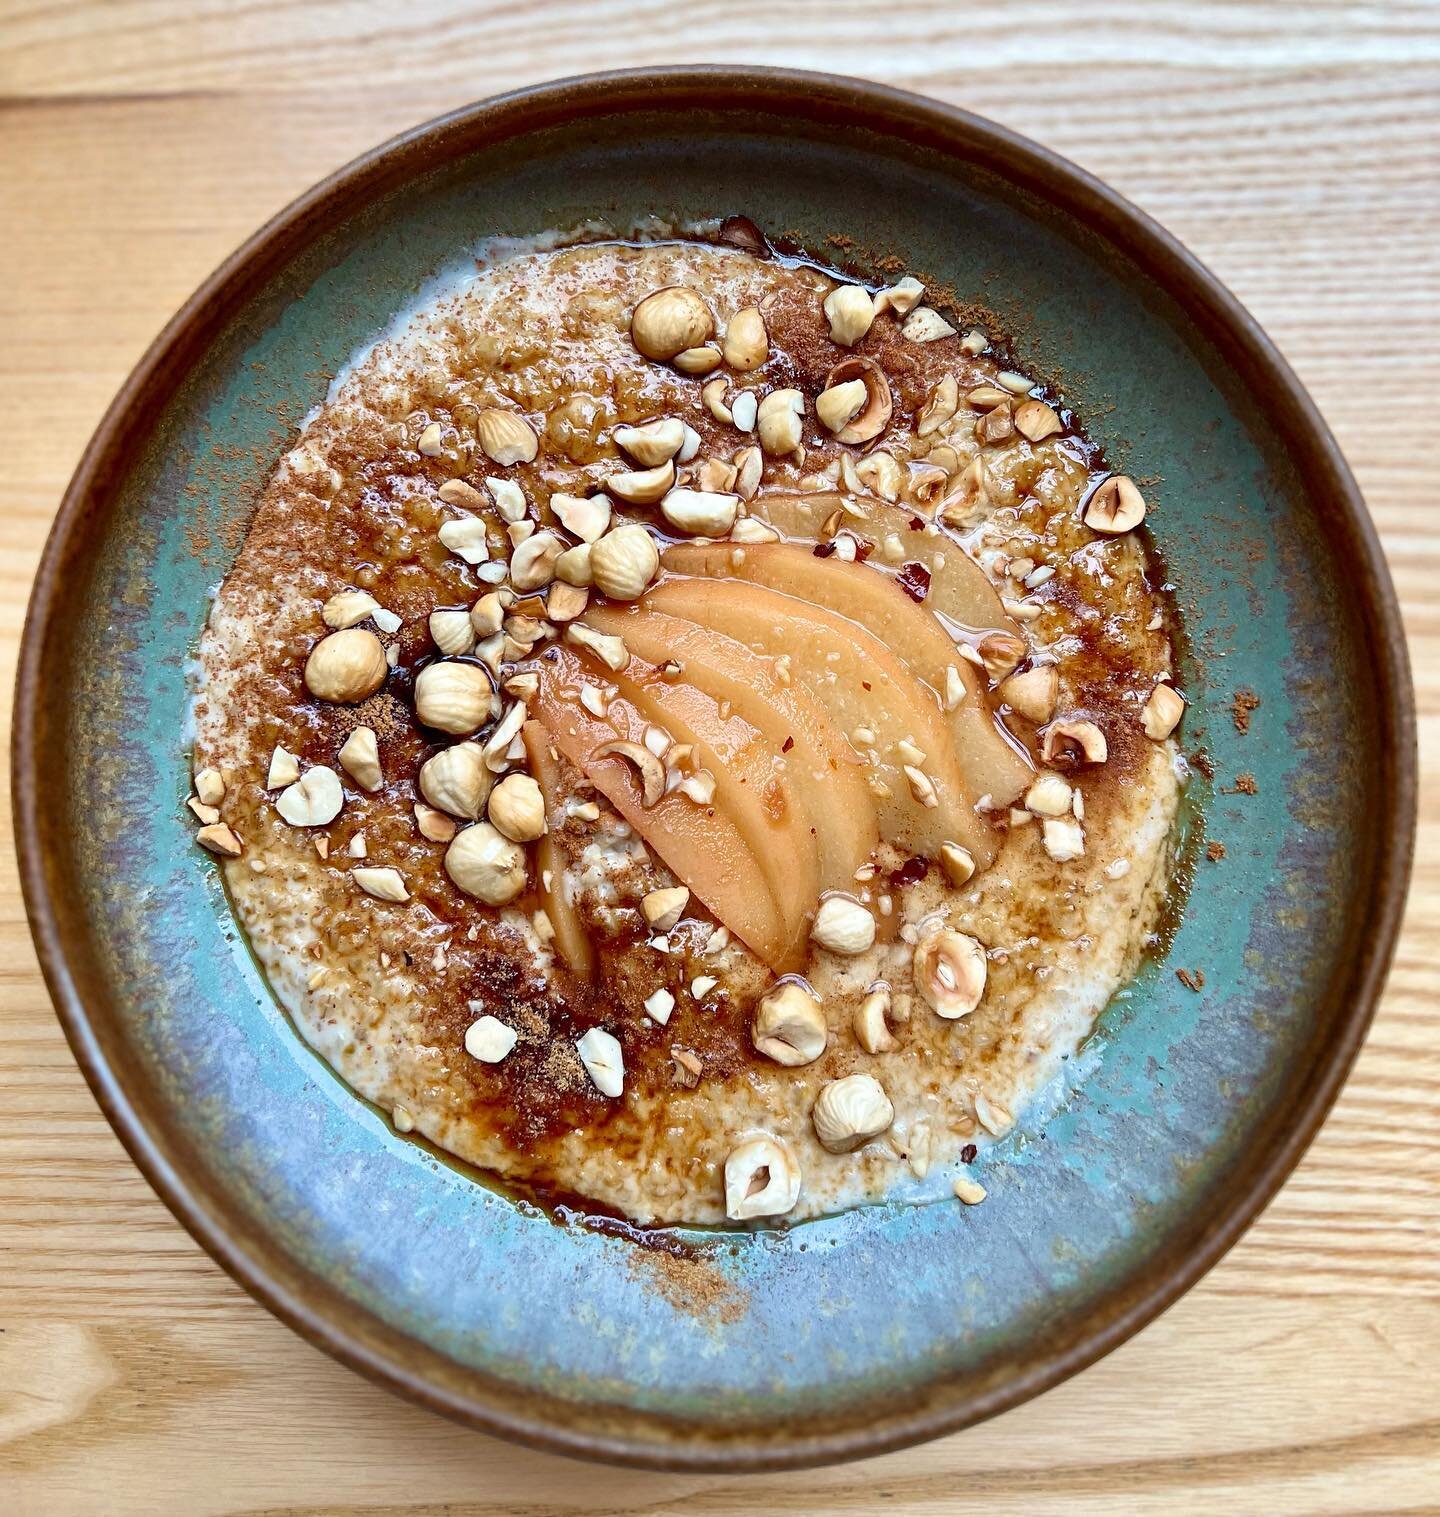 The winter chill is setting in but our steel cut oats with braised quince, hazelnut, oat milk and coconut sugar is guaranteed to leave you feeling warm and fuzzy and ready to take on any Wellington weather!